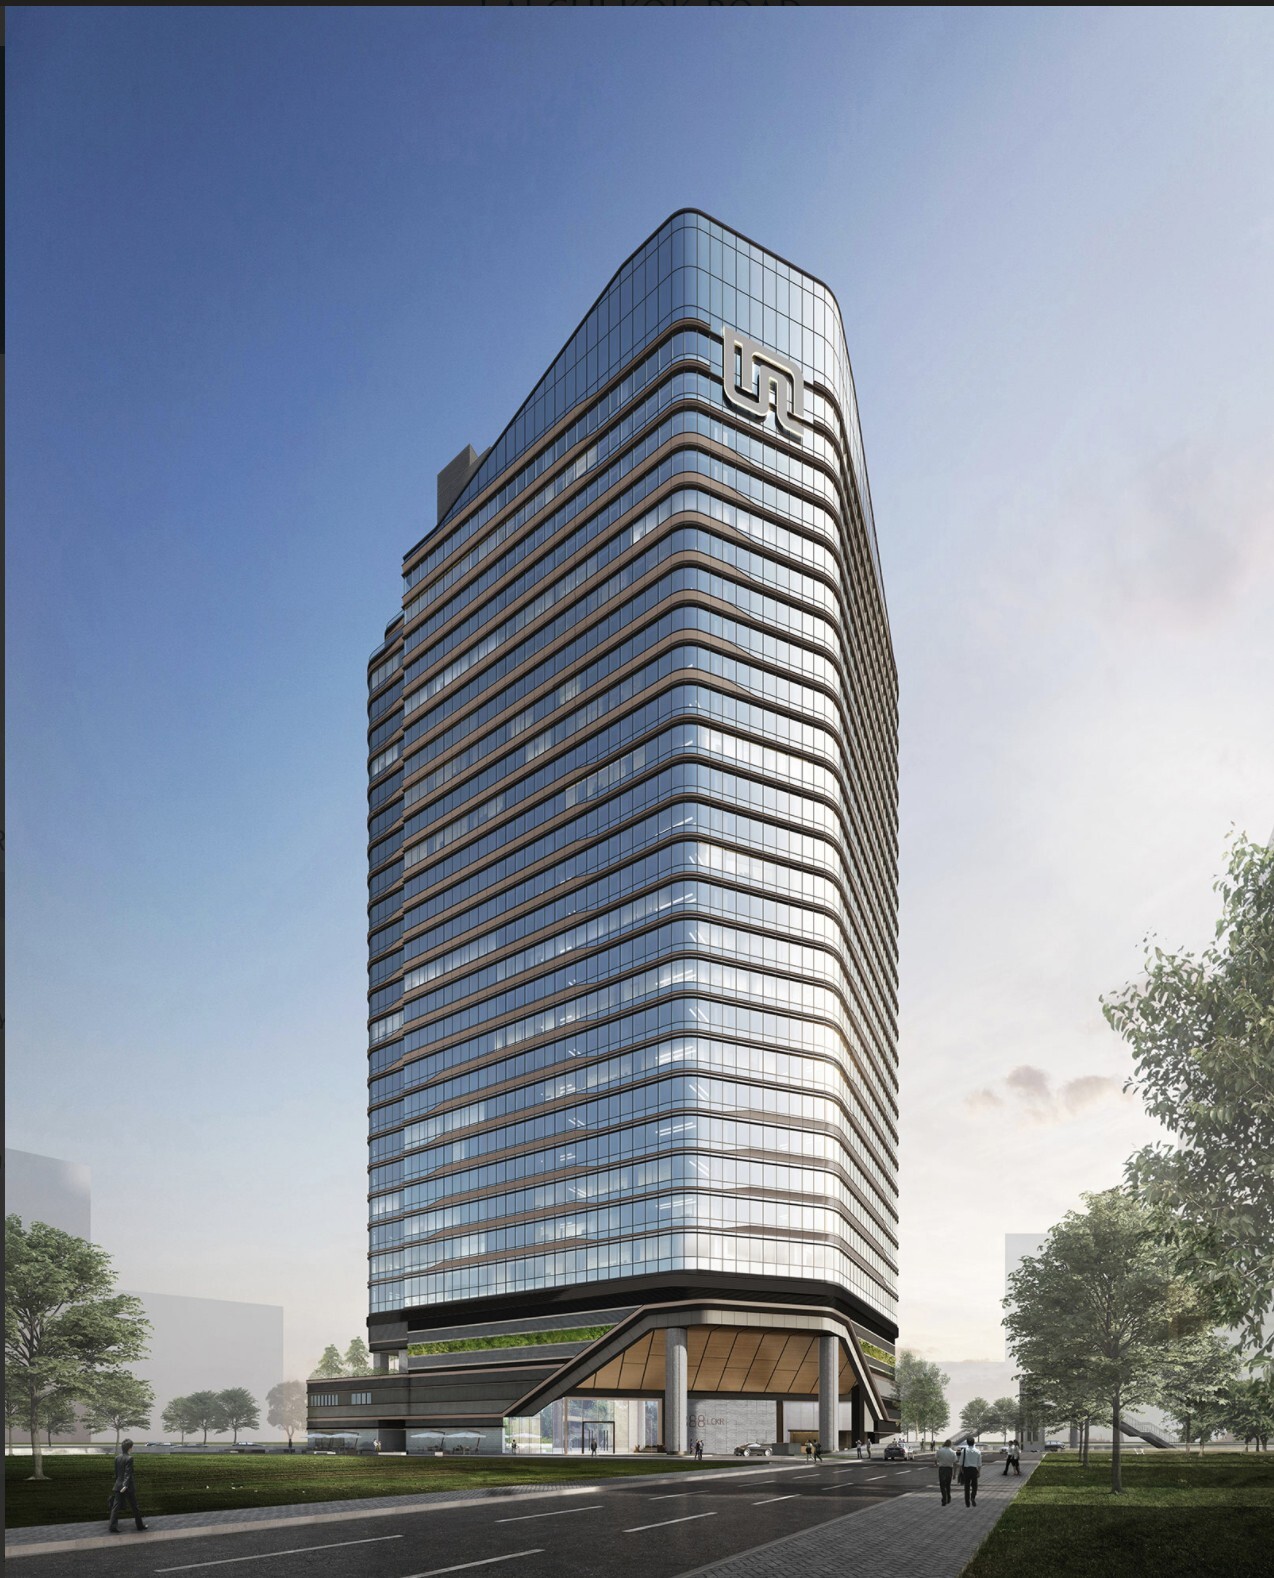 An artist’s impression of the building at 888 Lai Chi Kok Road. Photo: Handout